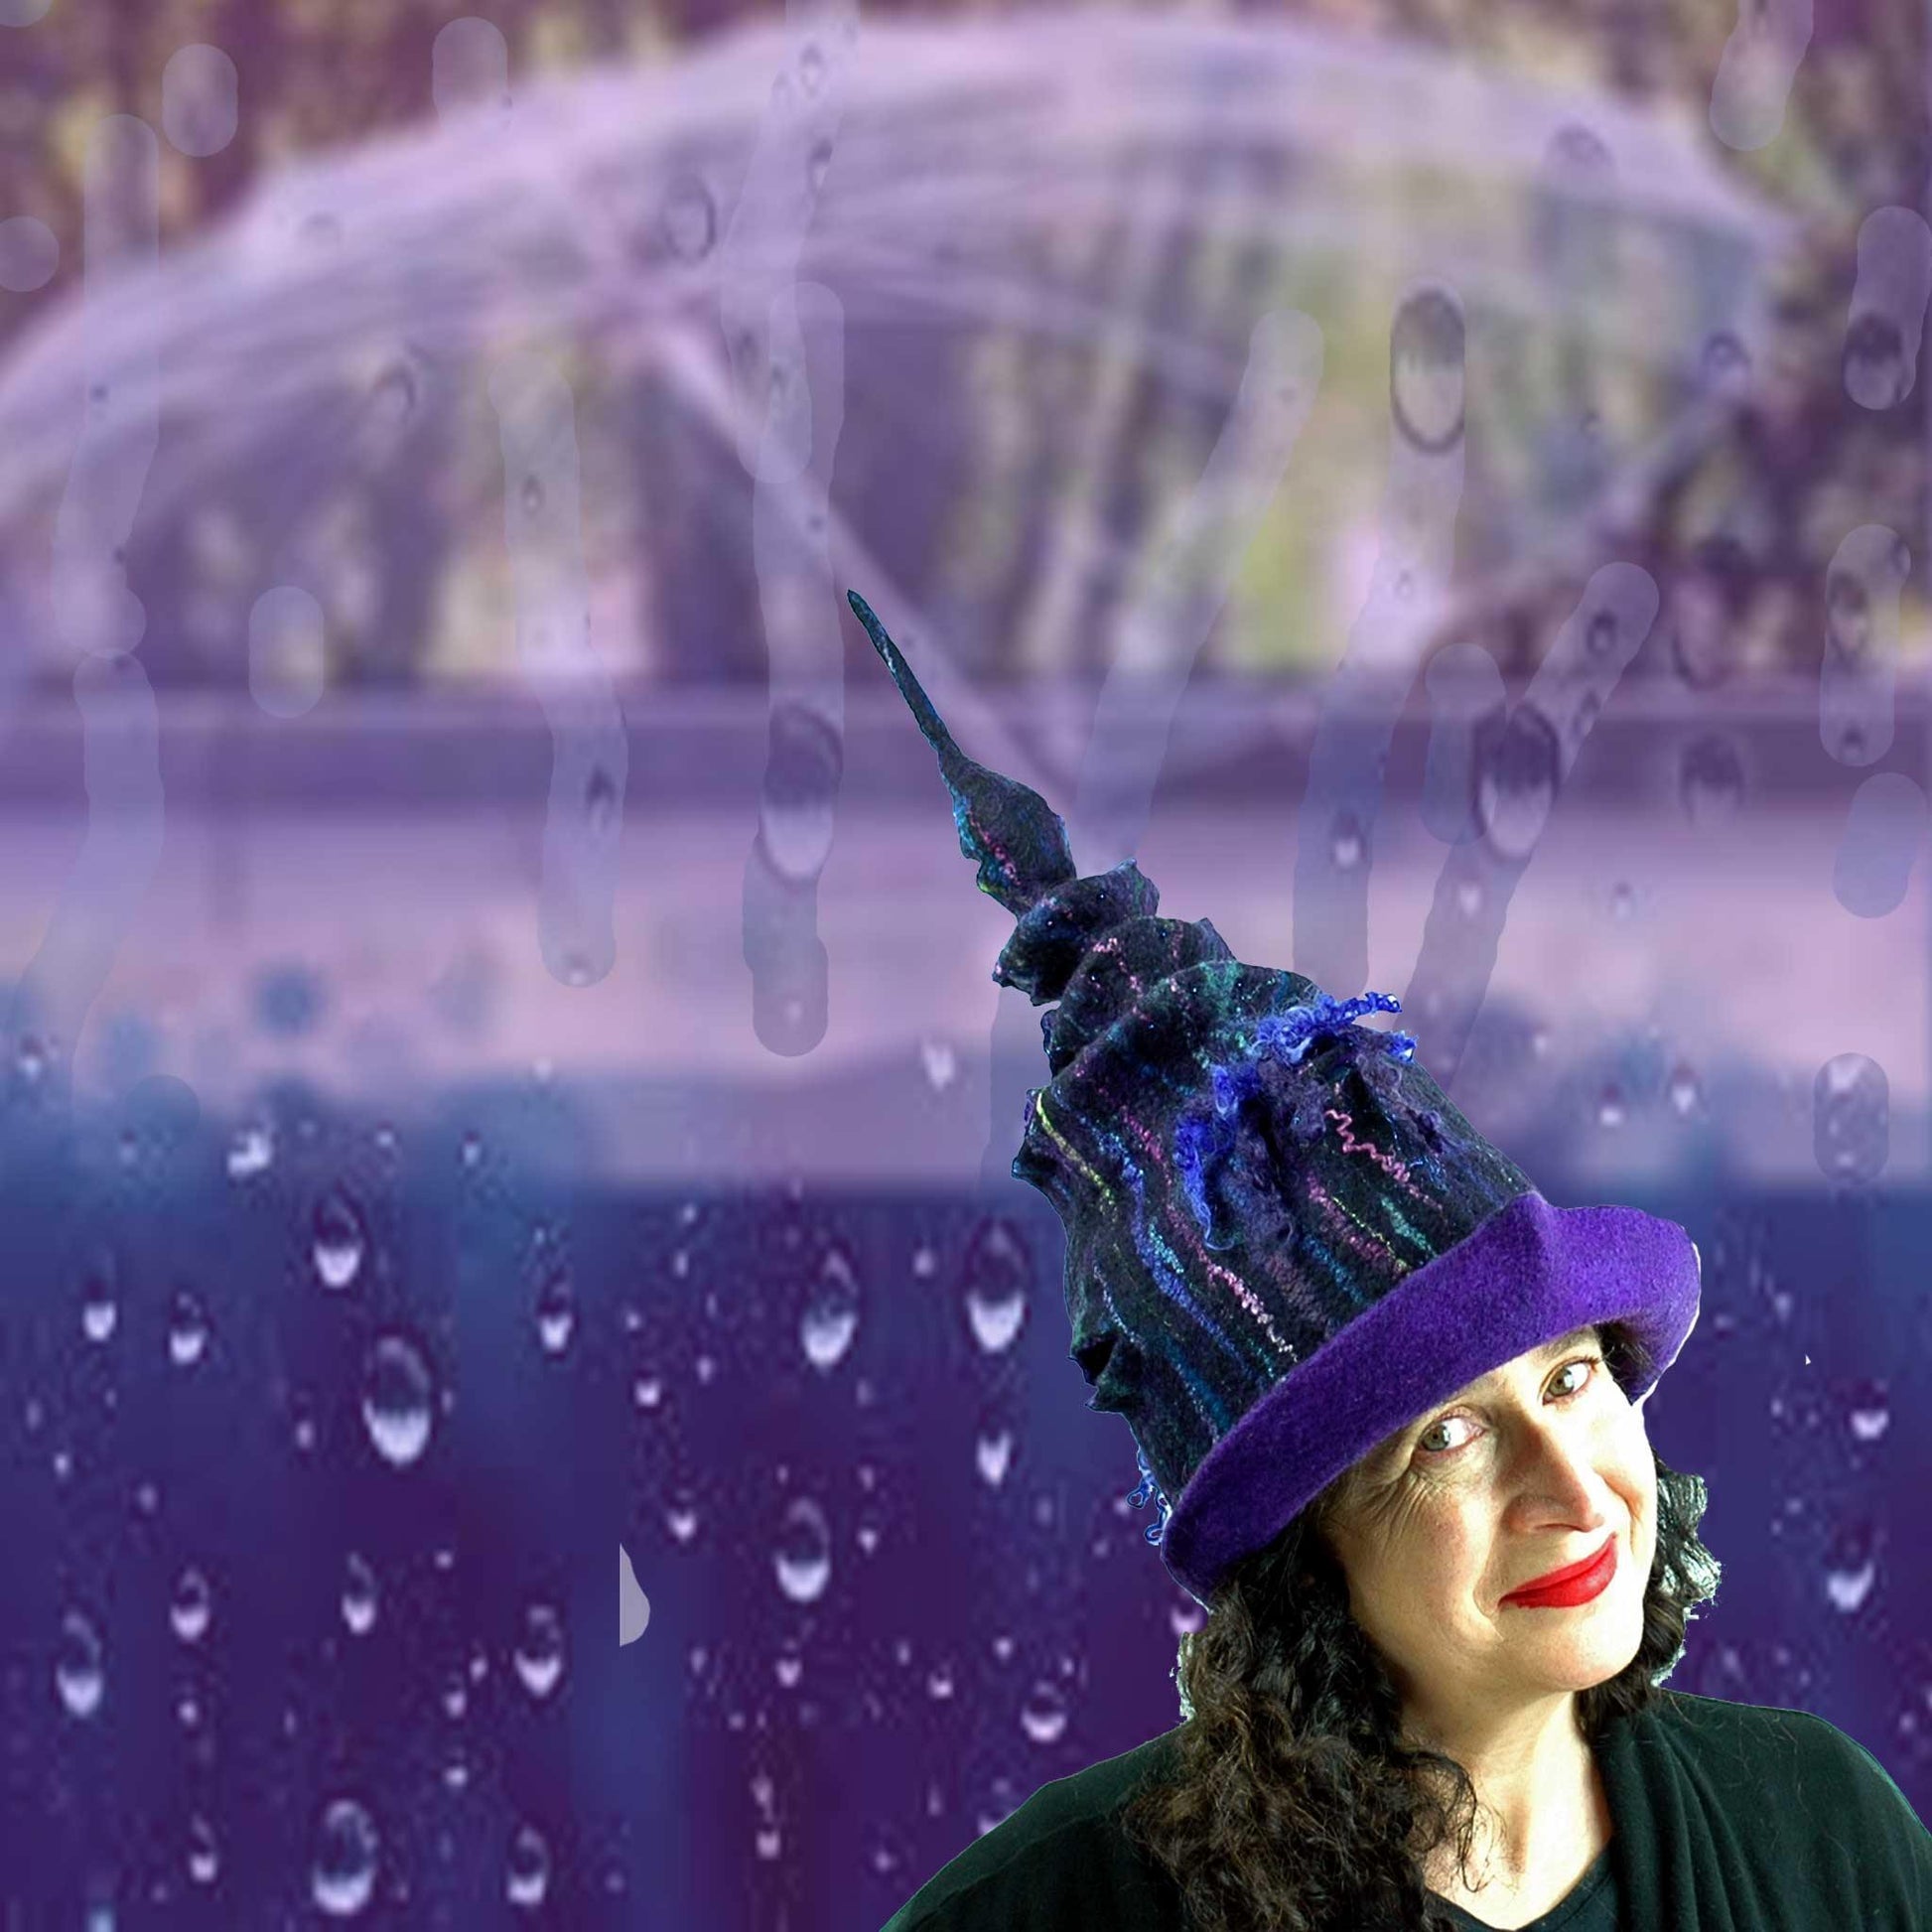 Dark Unicorn Felted Wizard Hat against a background of purple rain and an umbrella.